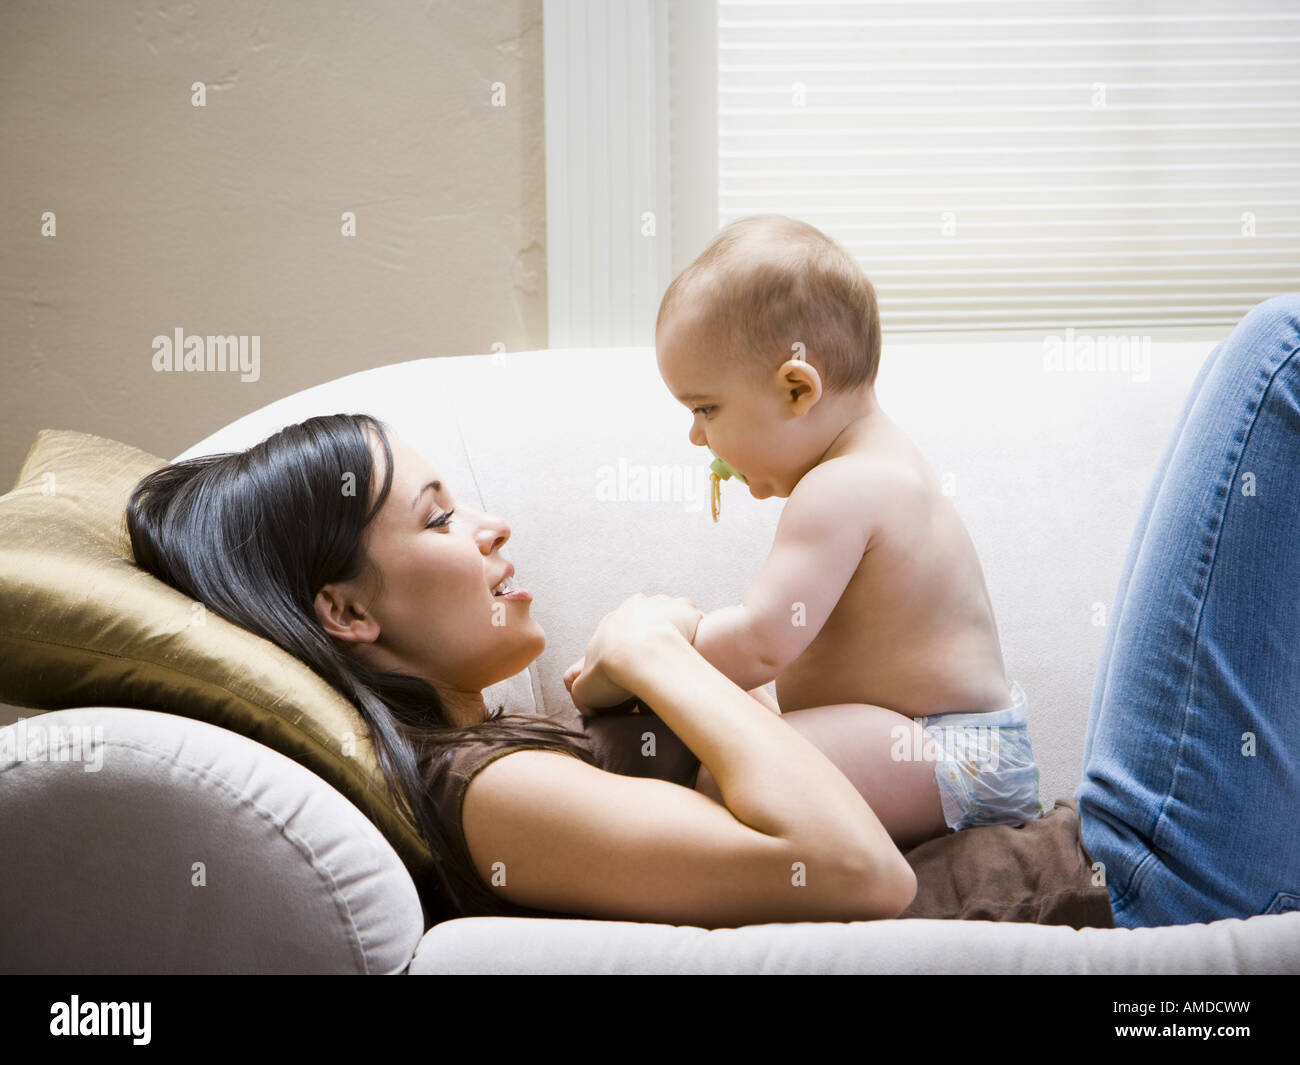 Woman lying down on sofa with baby Stock Photo